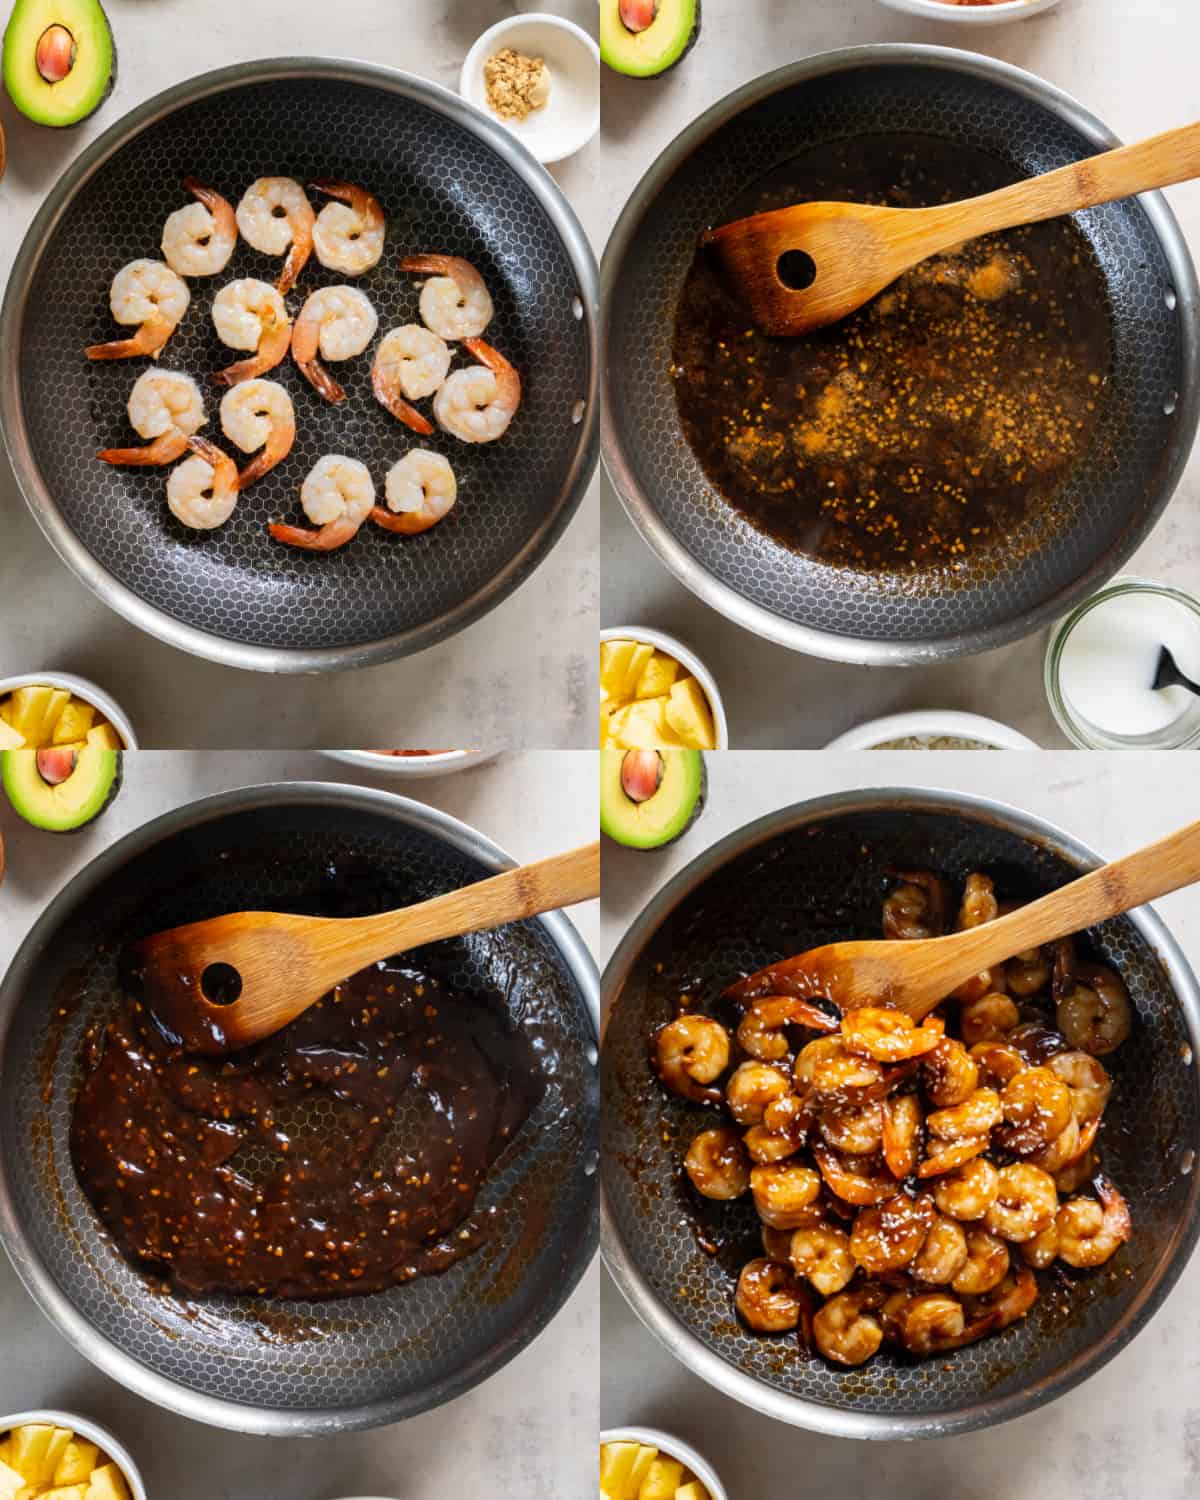 Cooking shrimp in the skillet with sauce and mixing it together before serving.